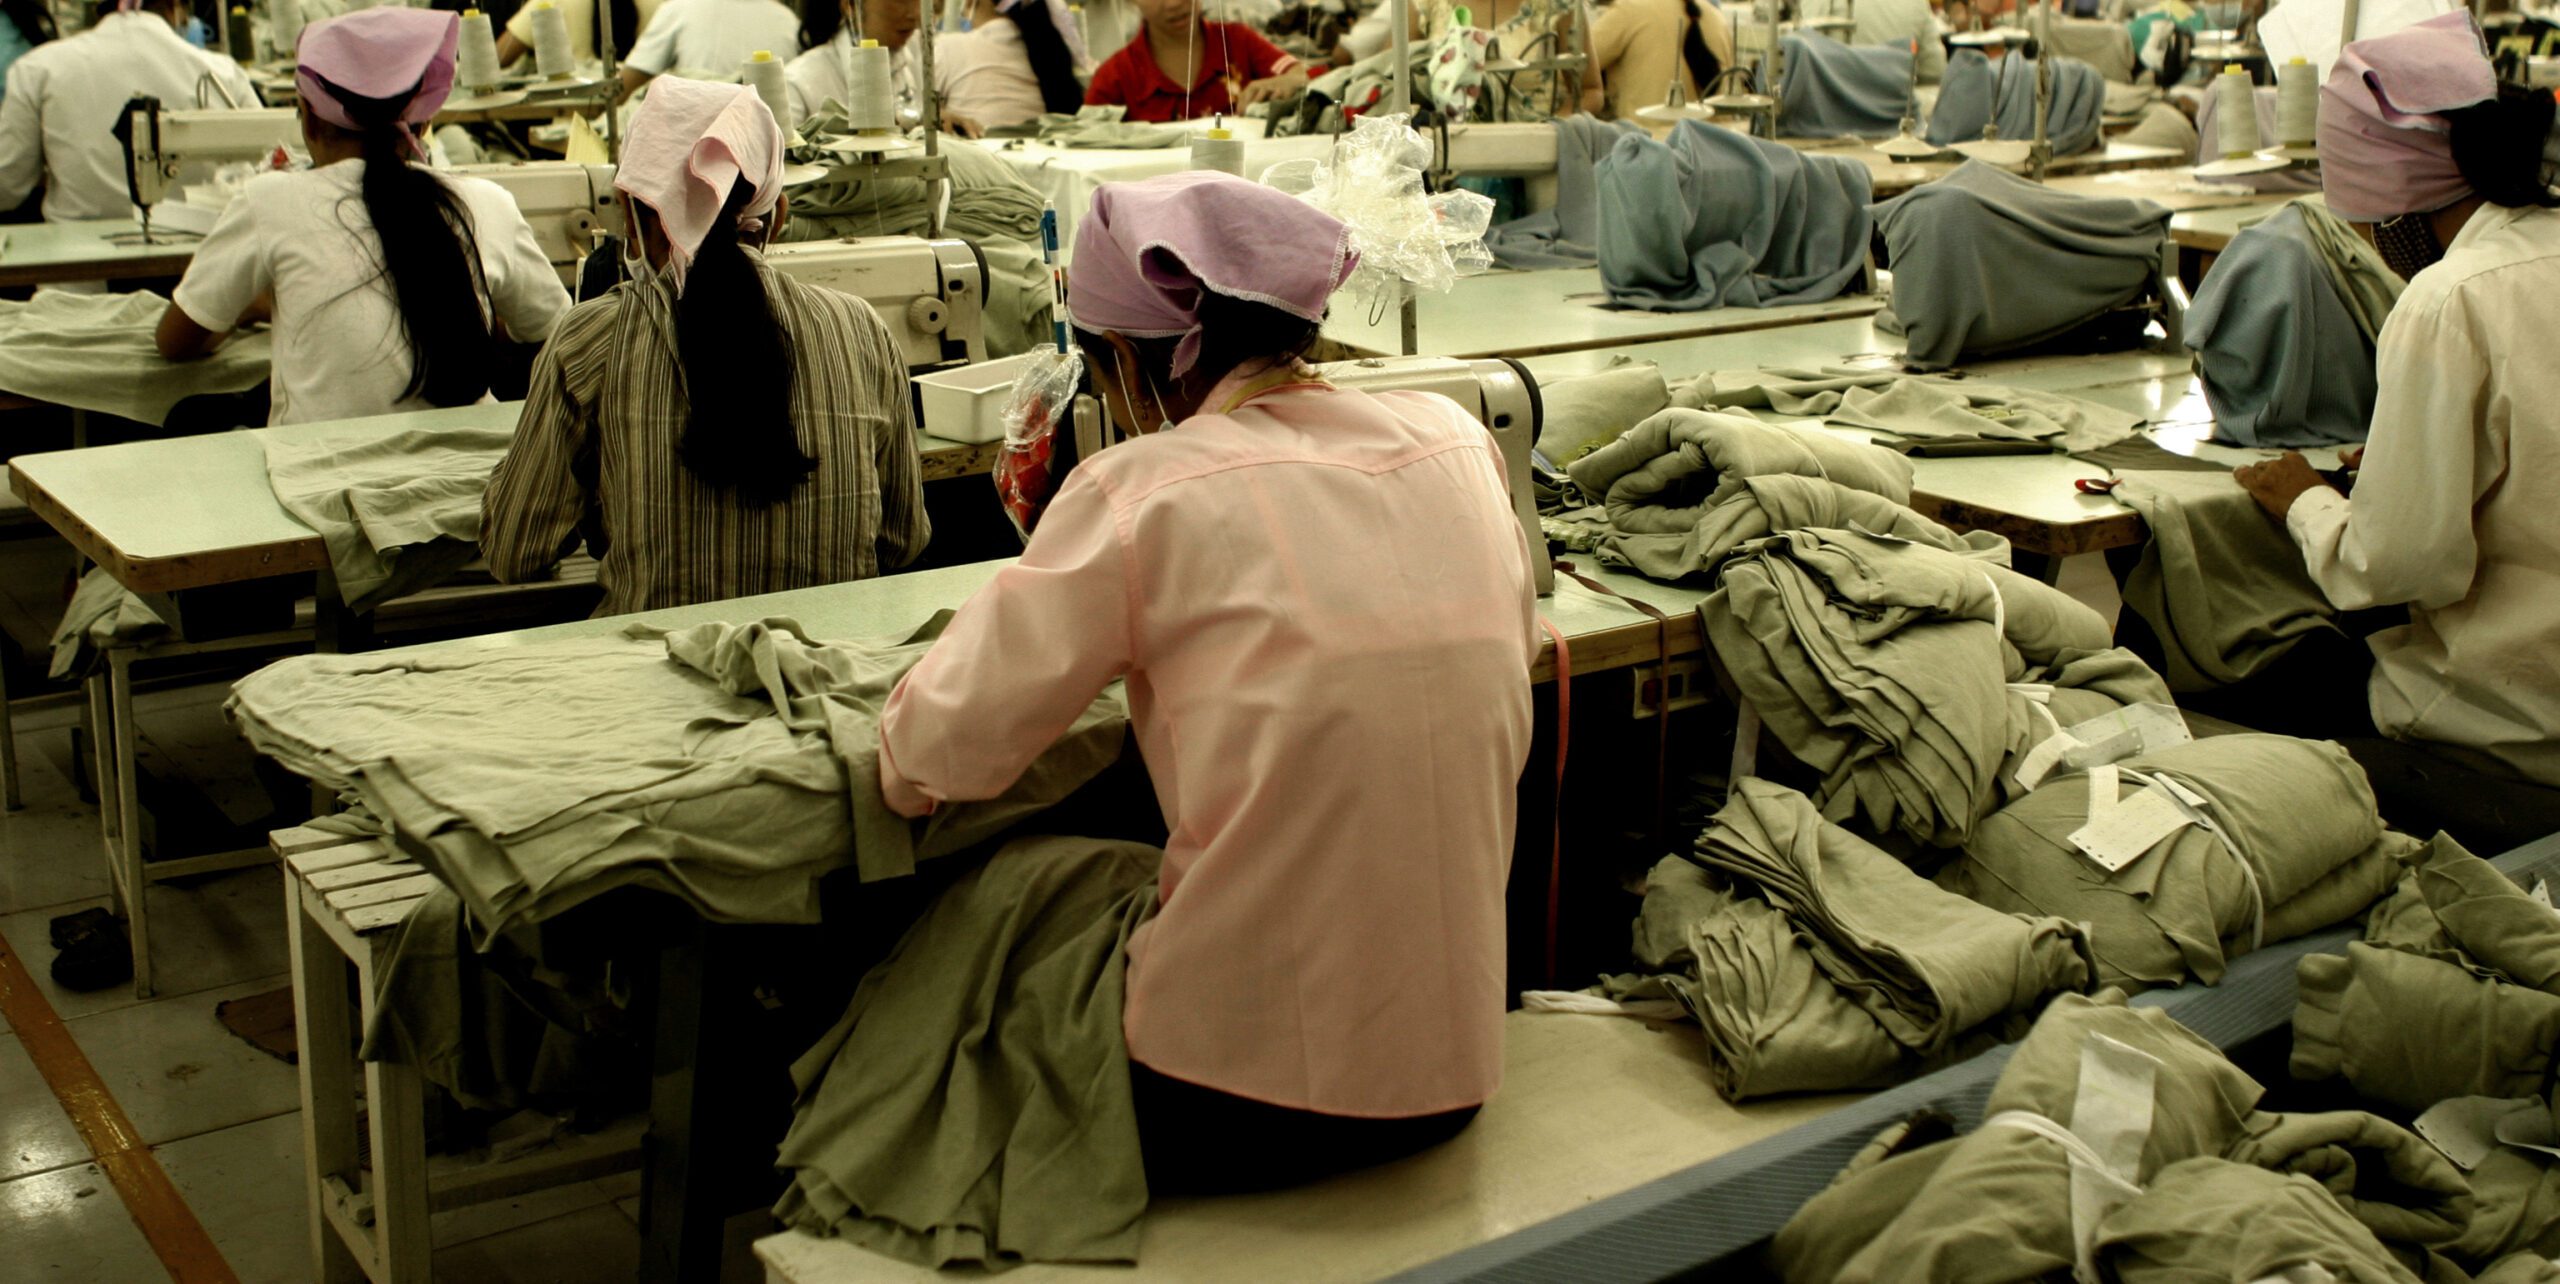 empowering-female-workers-in-the-apparel-industry